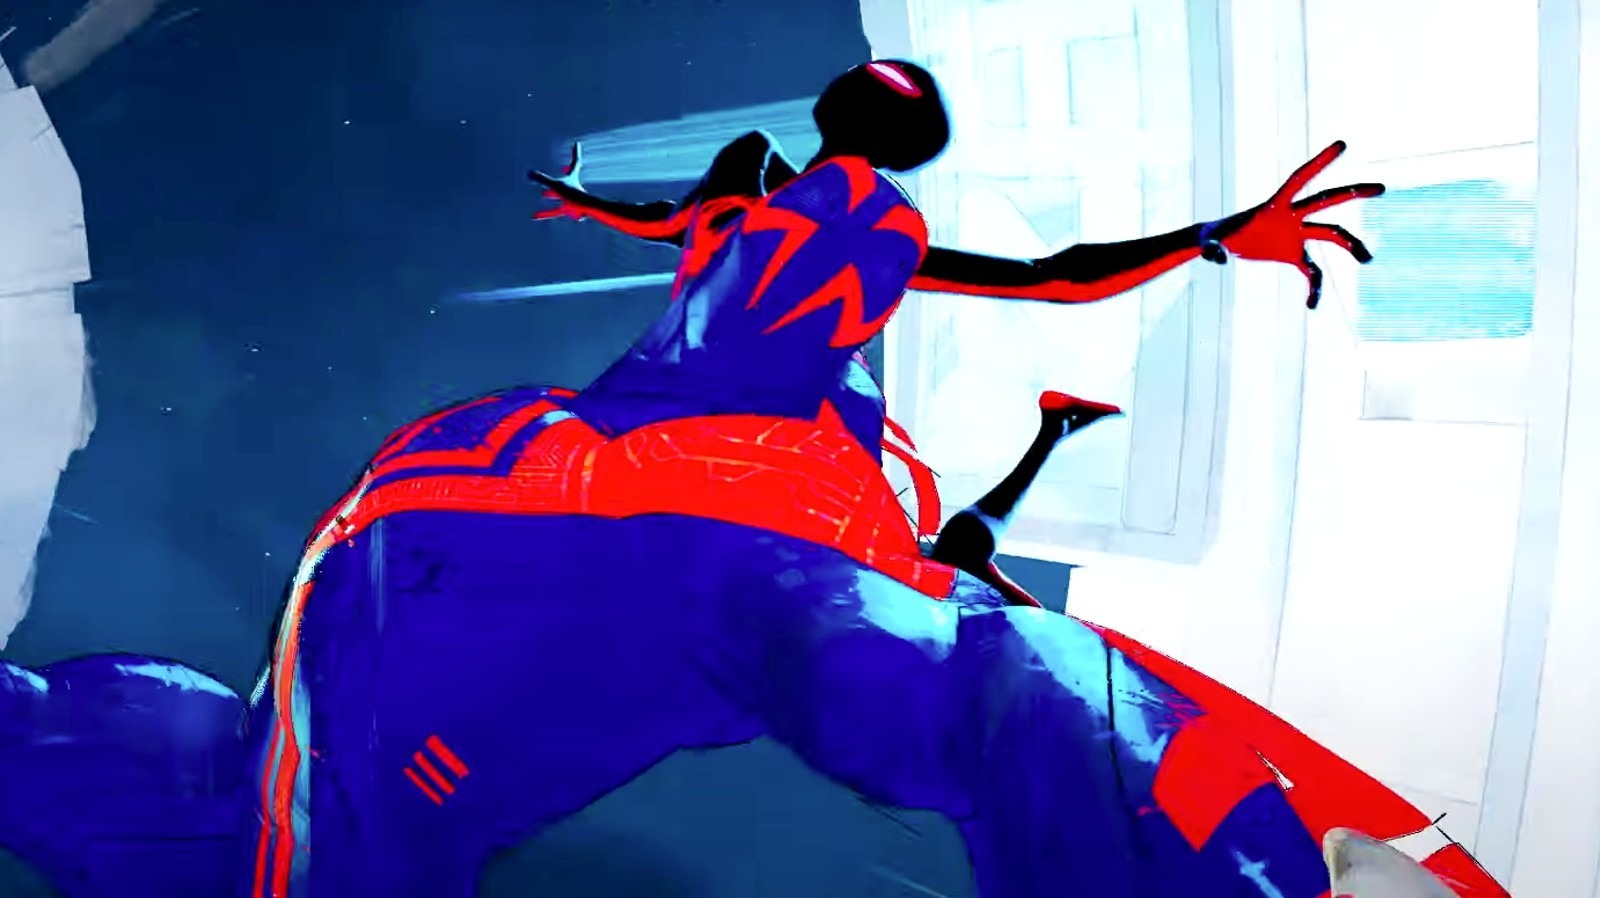 Spider-Man Trailer Teases the End of the Spider-Verse